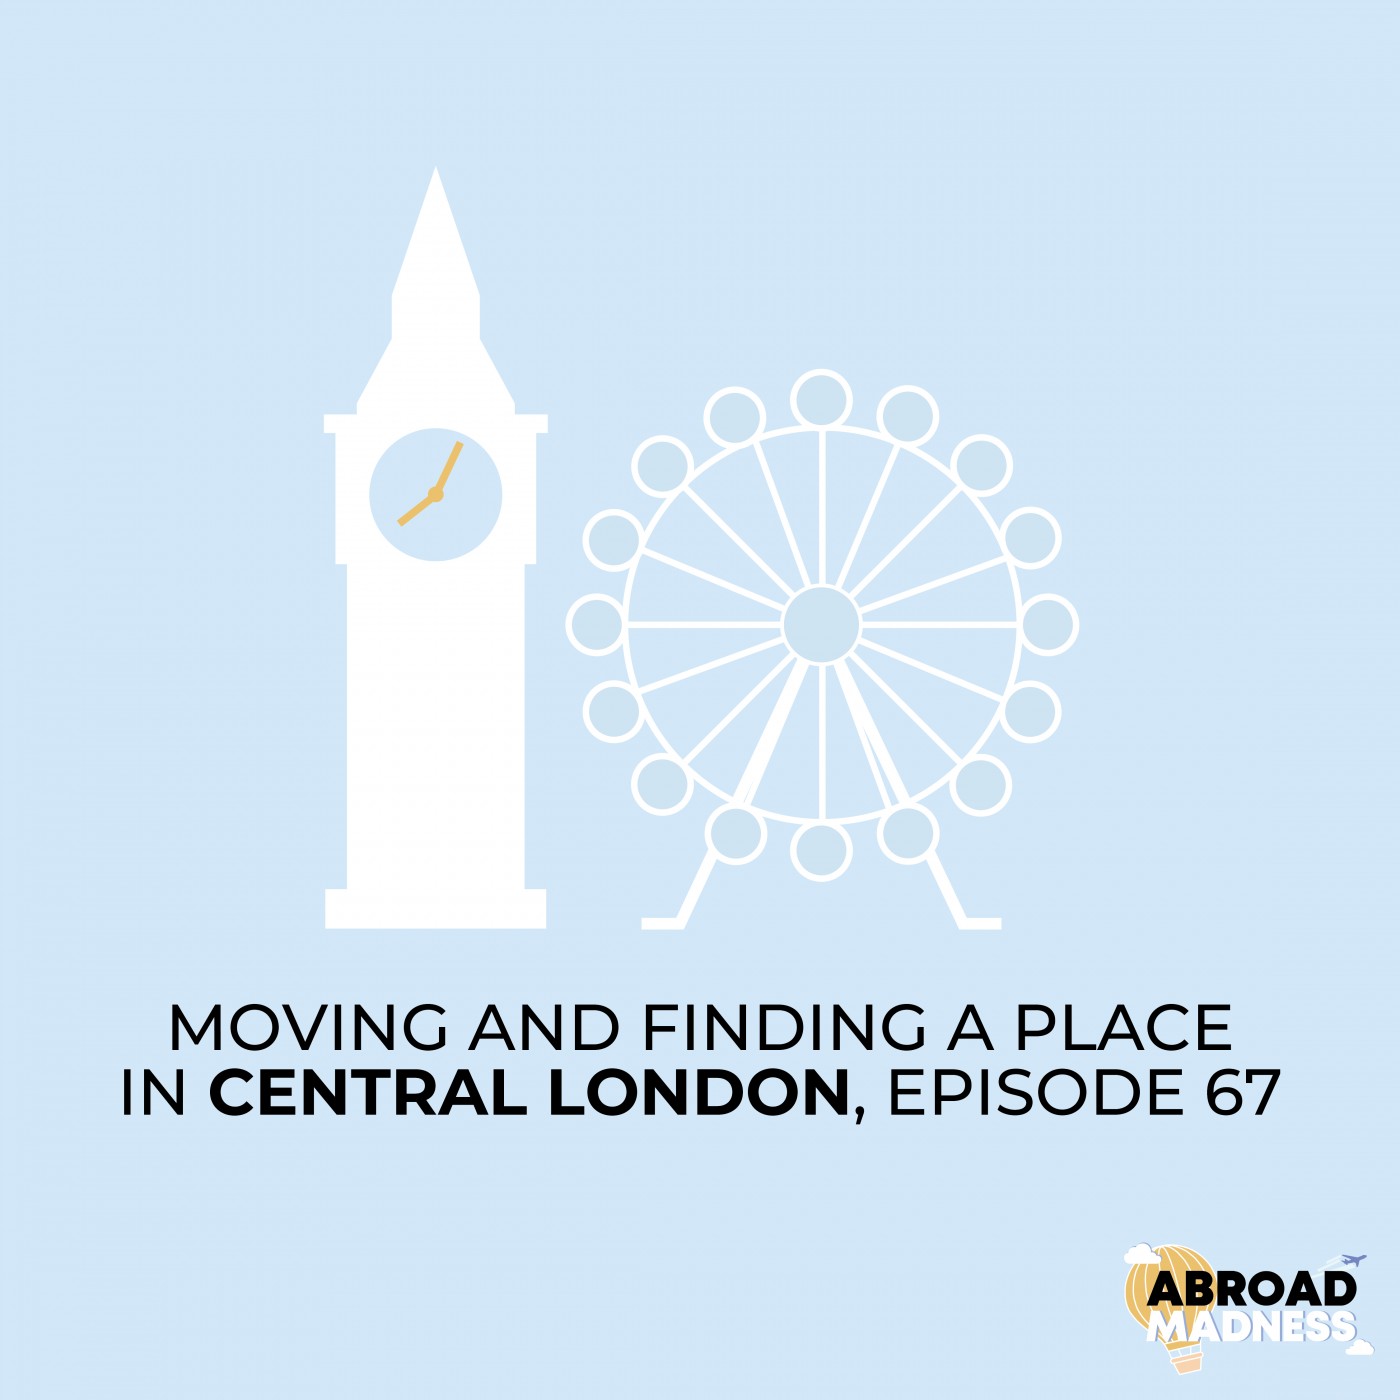 Moving and finding a place in central London, Episode 67